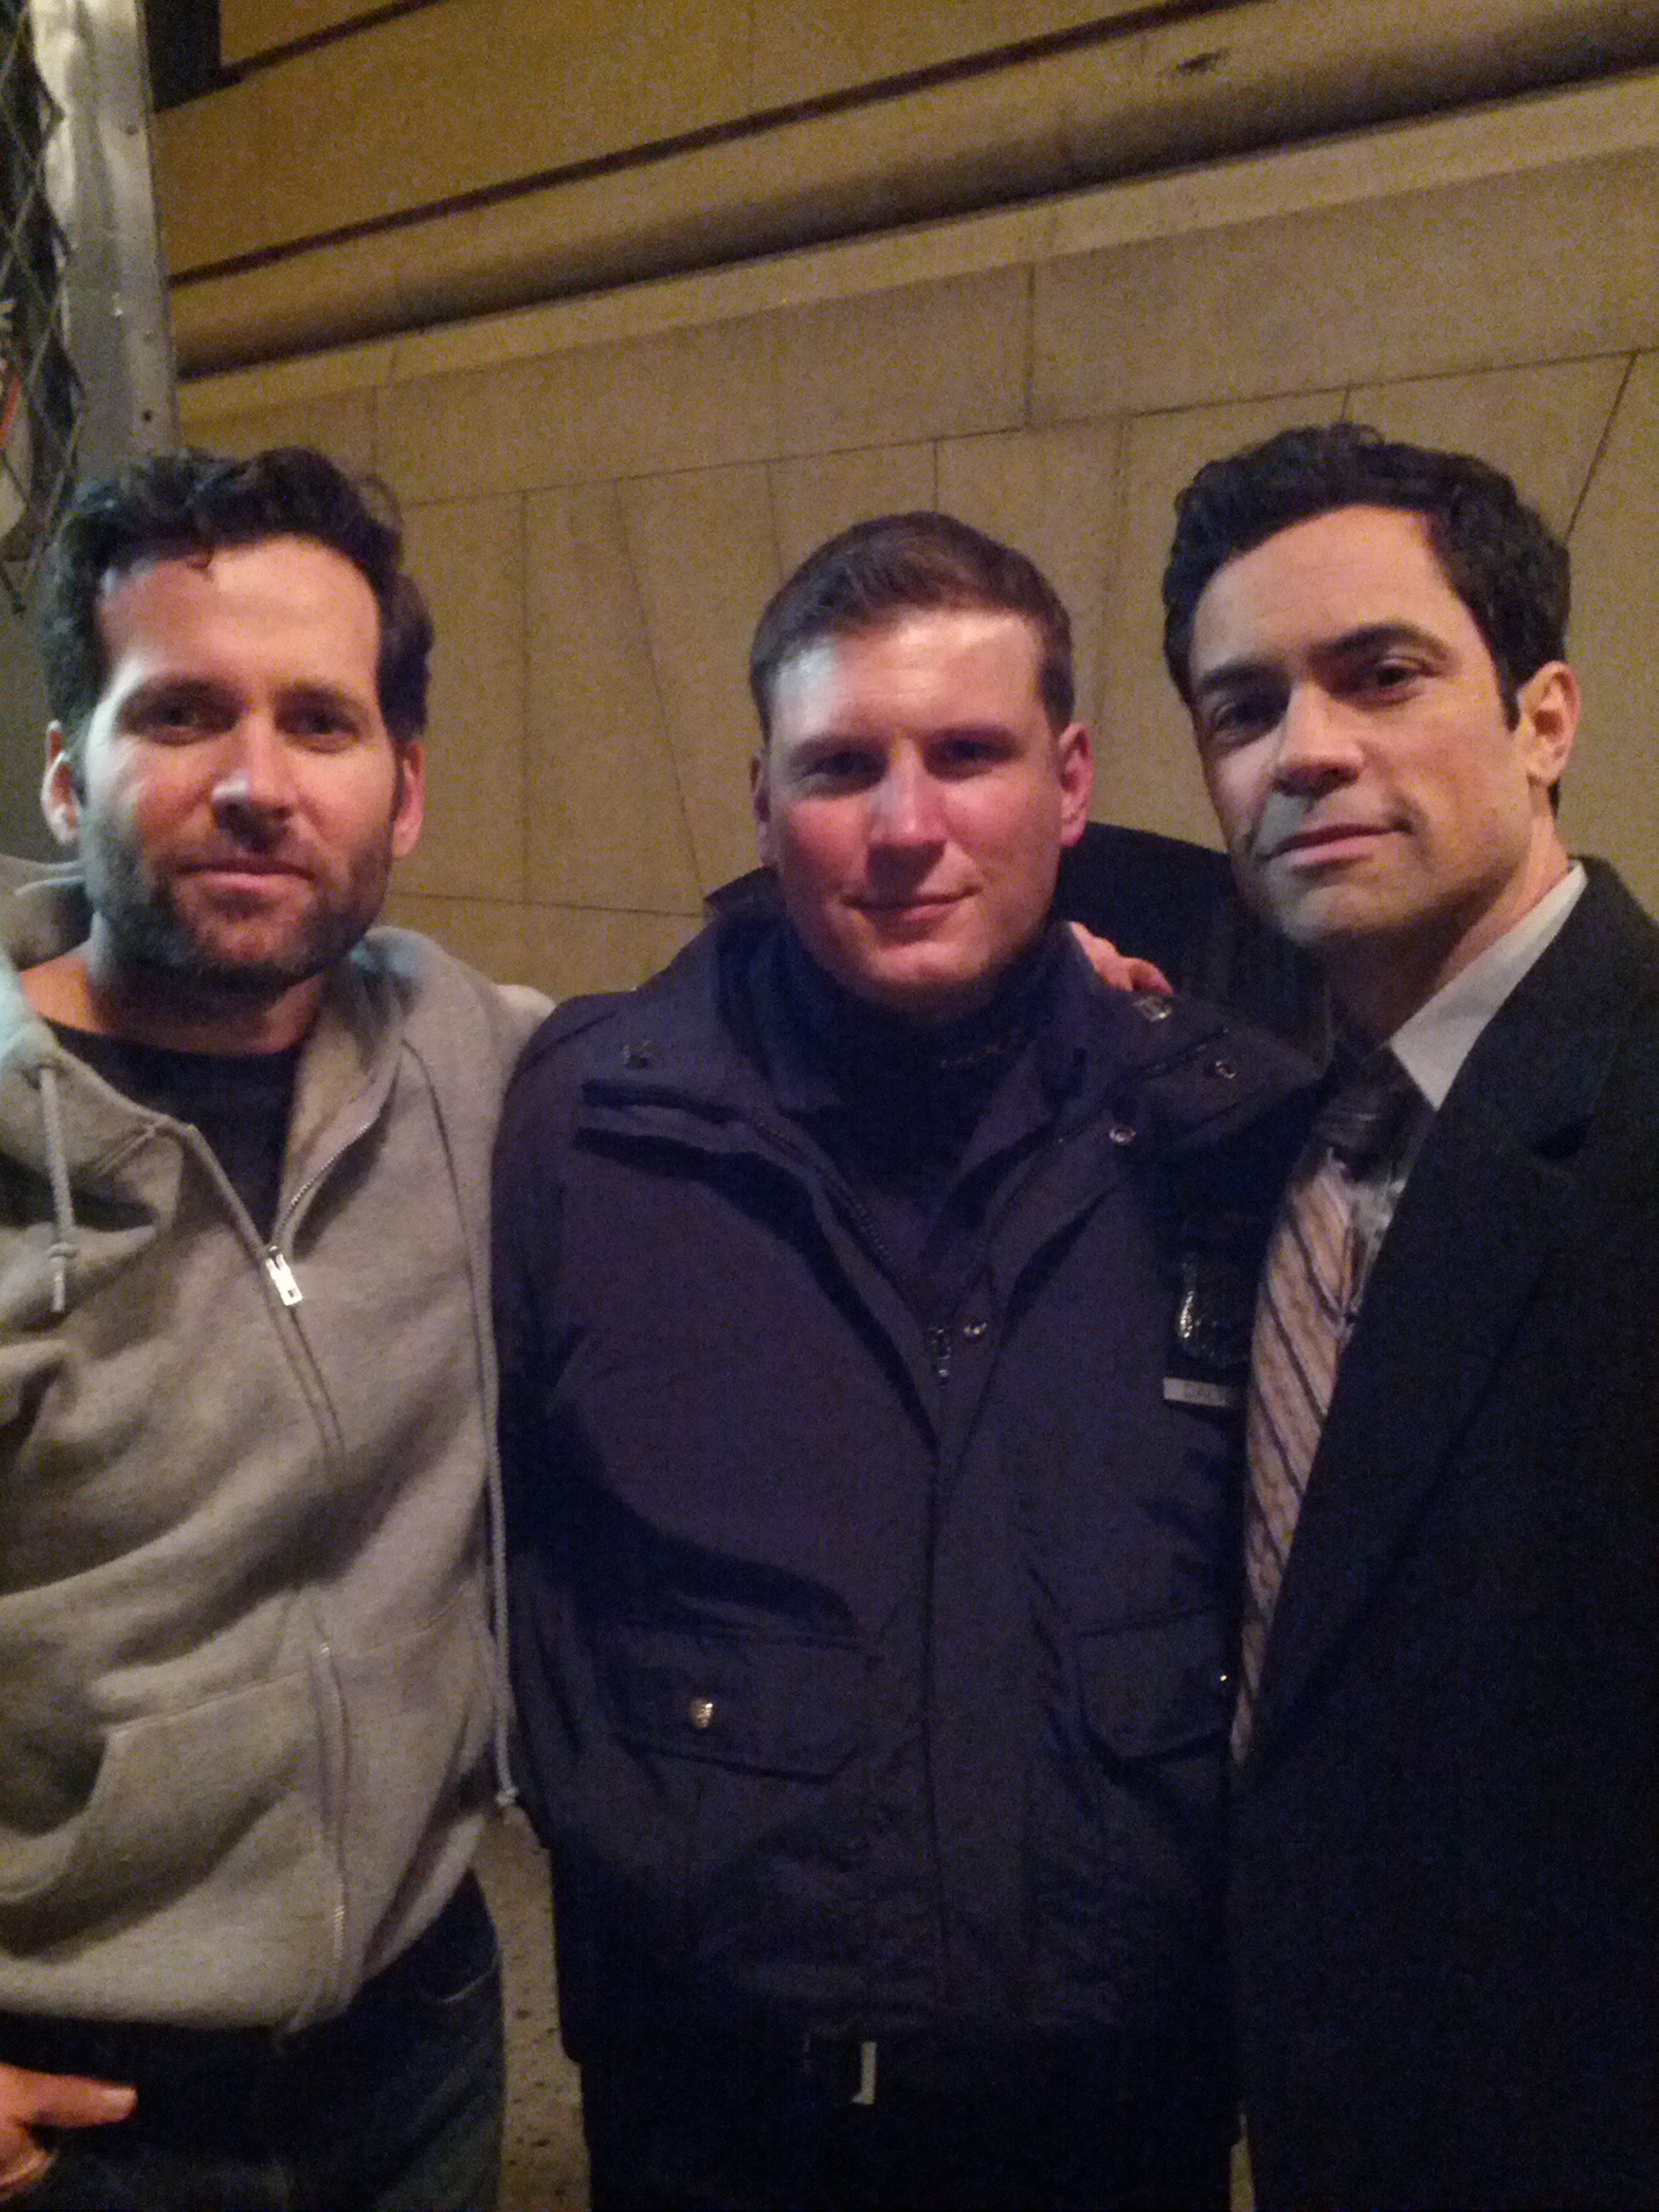 working on SVU with Danny Pino and Eion Bailey